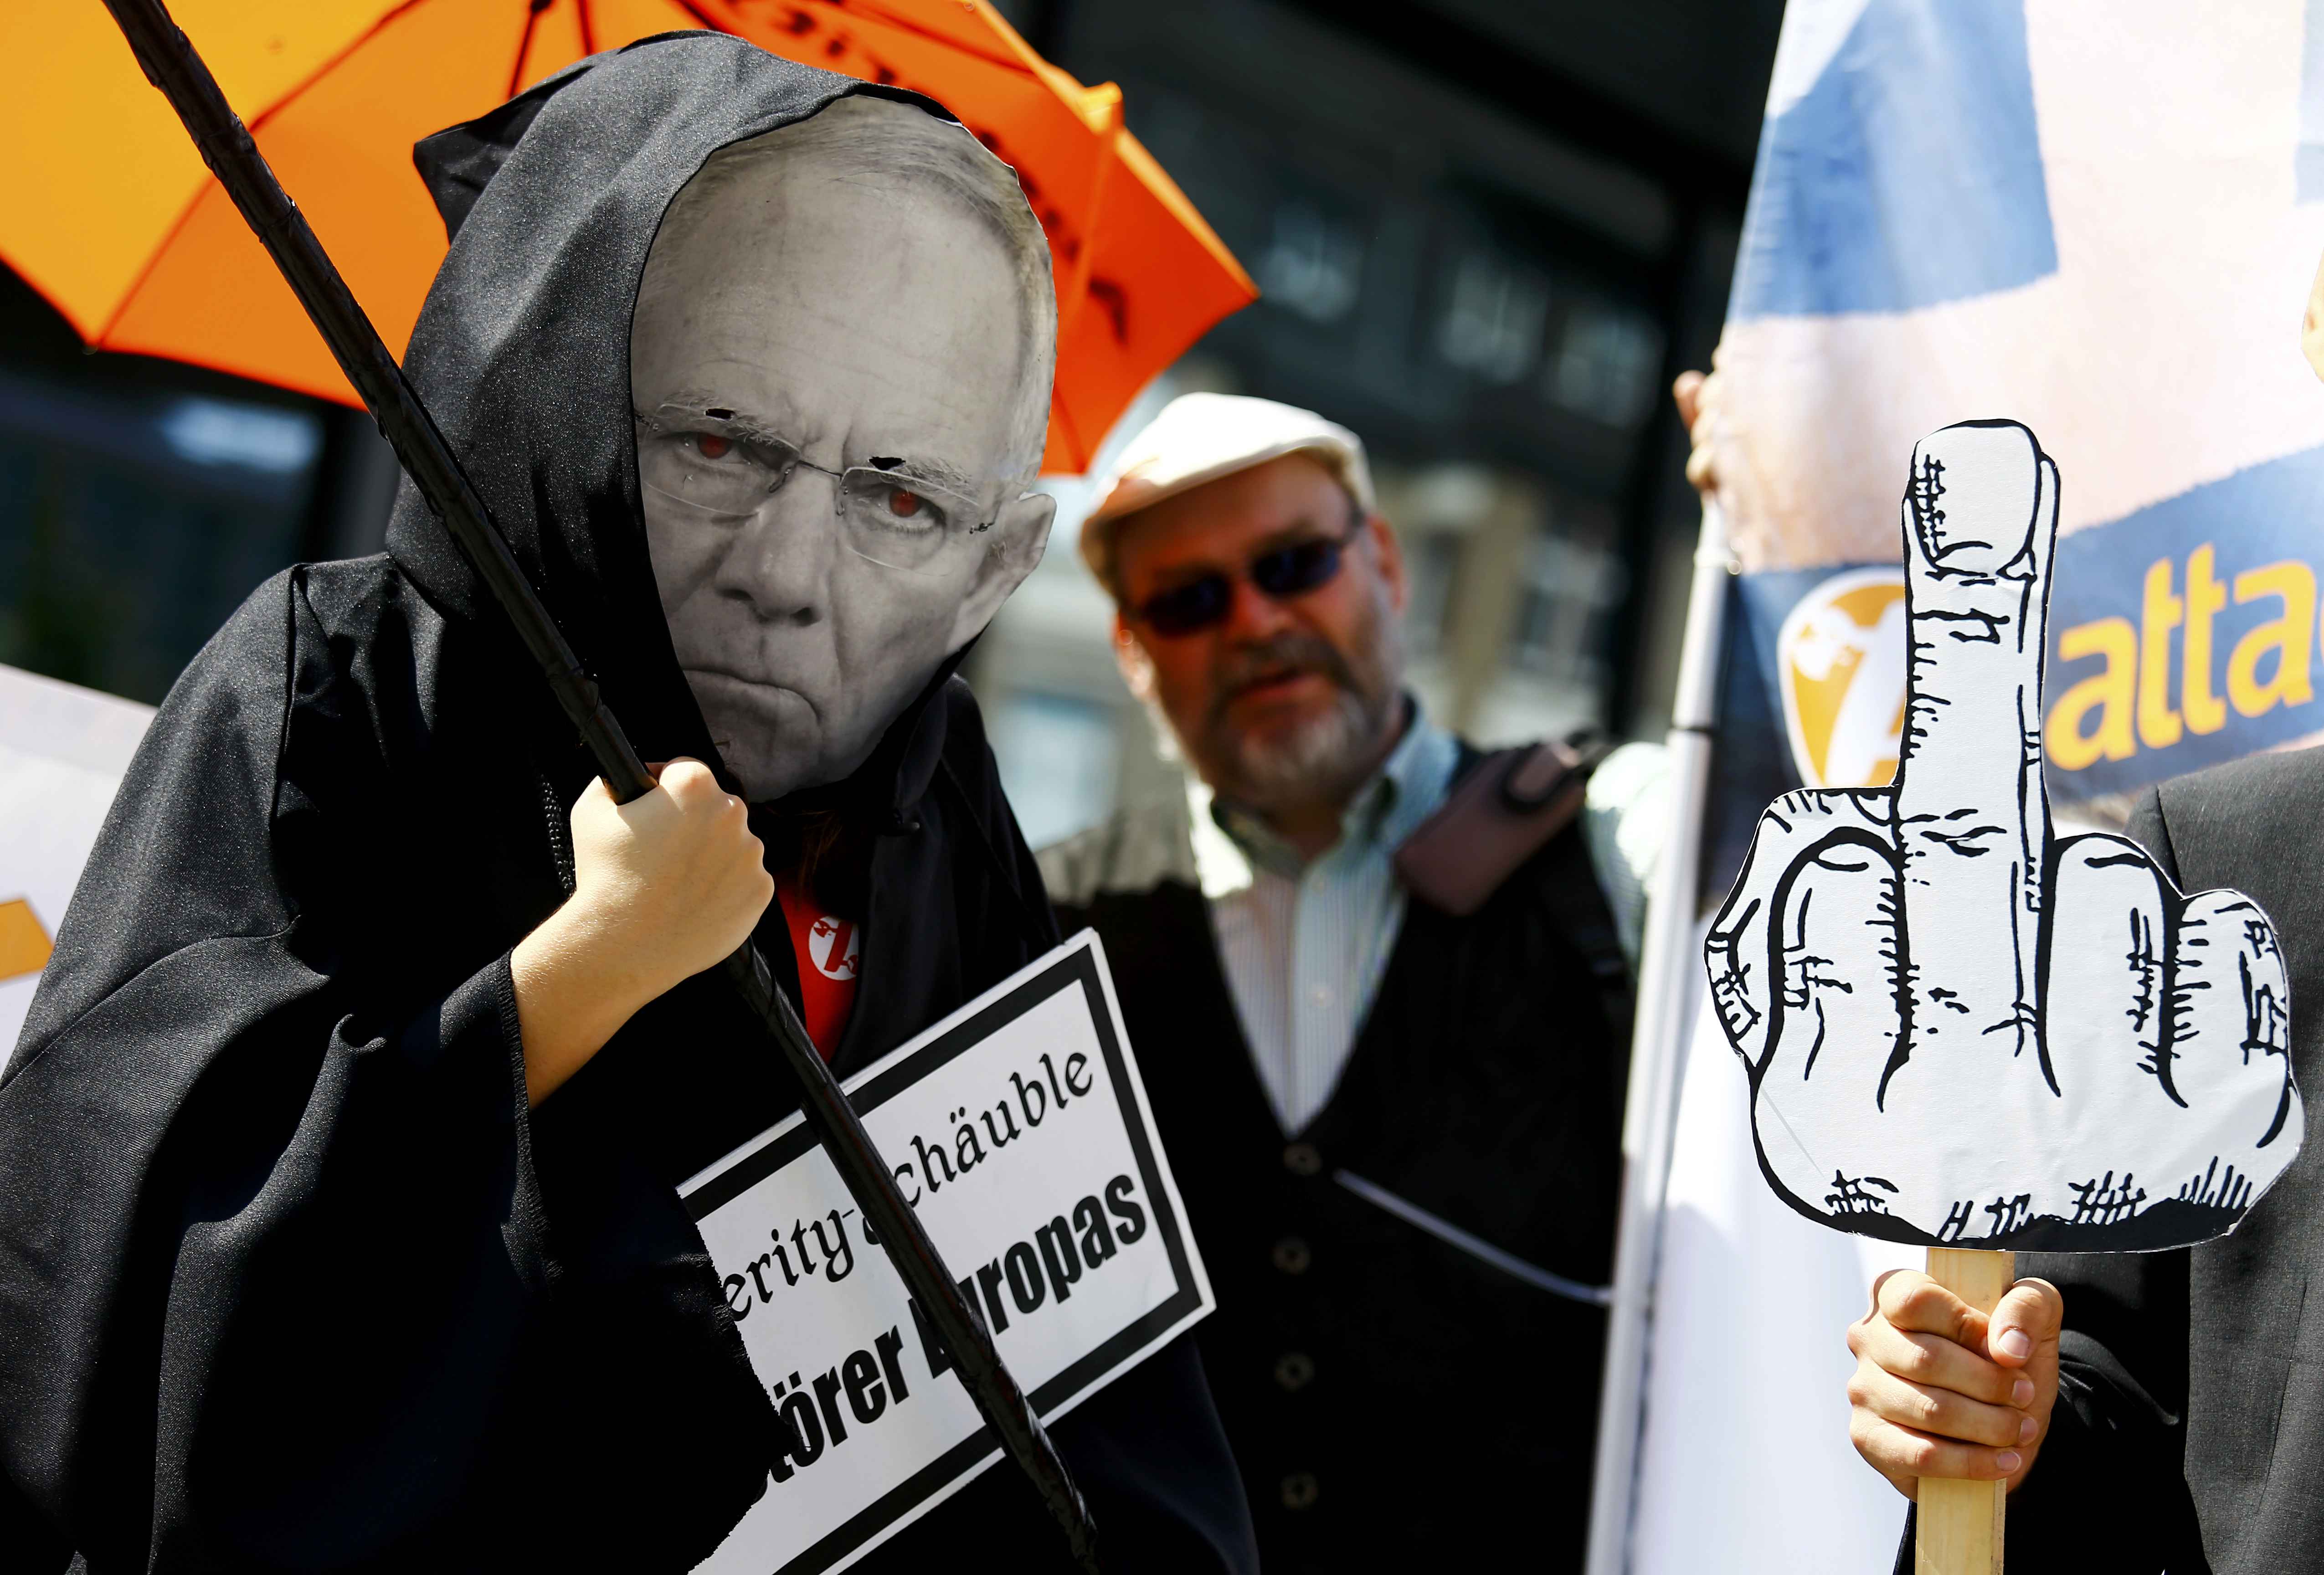 A demonstrator wearing the mask depicting German Finance Minister Wolfgang Schaeuble takes part in a protest outside the European Central Bank headquarters in Frankfurt, Germany, July 16, 2015.